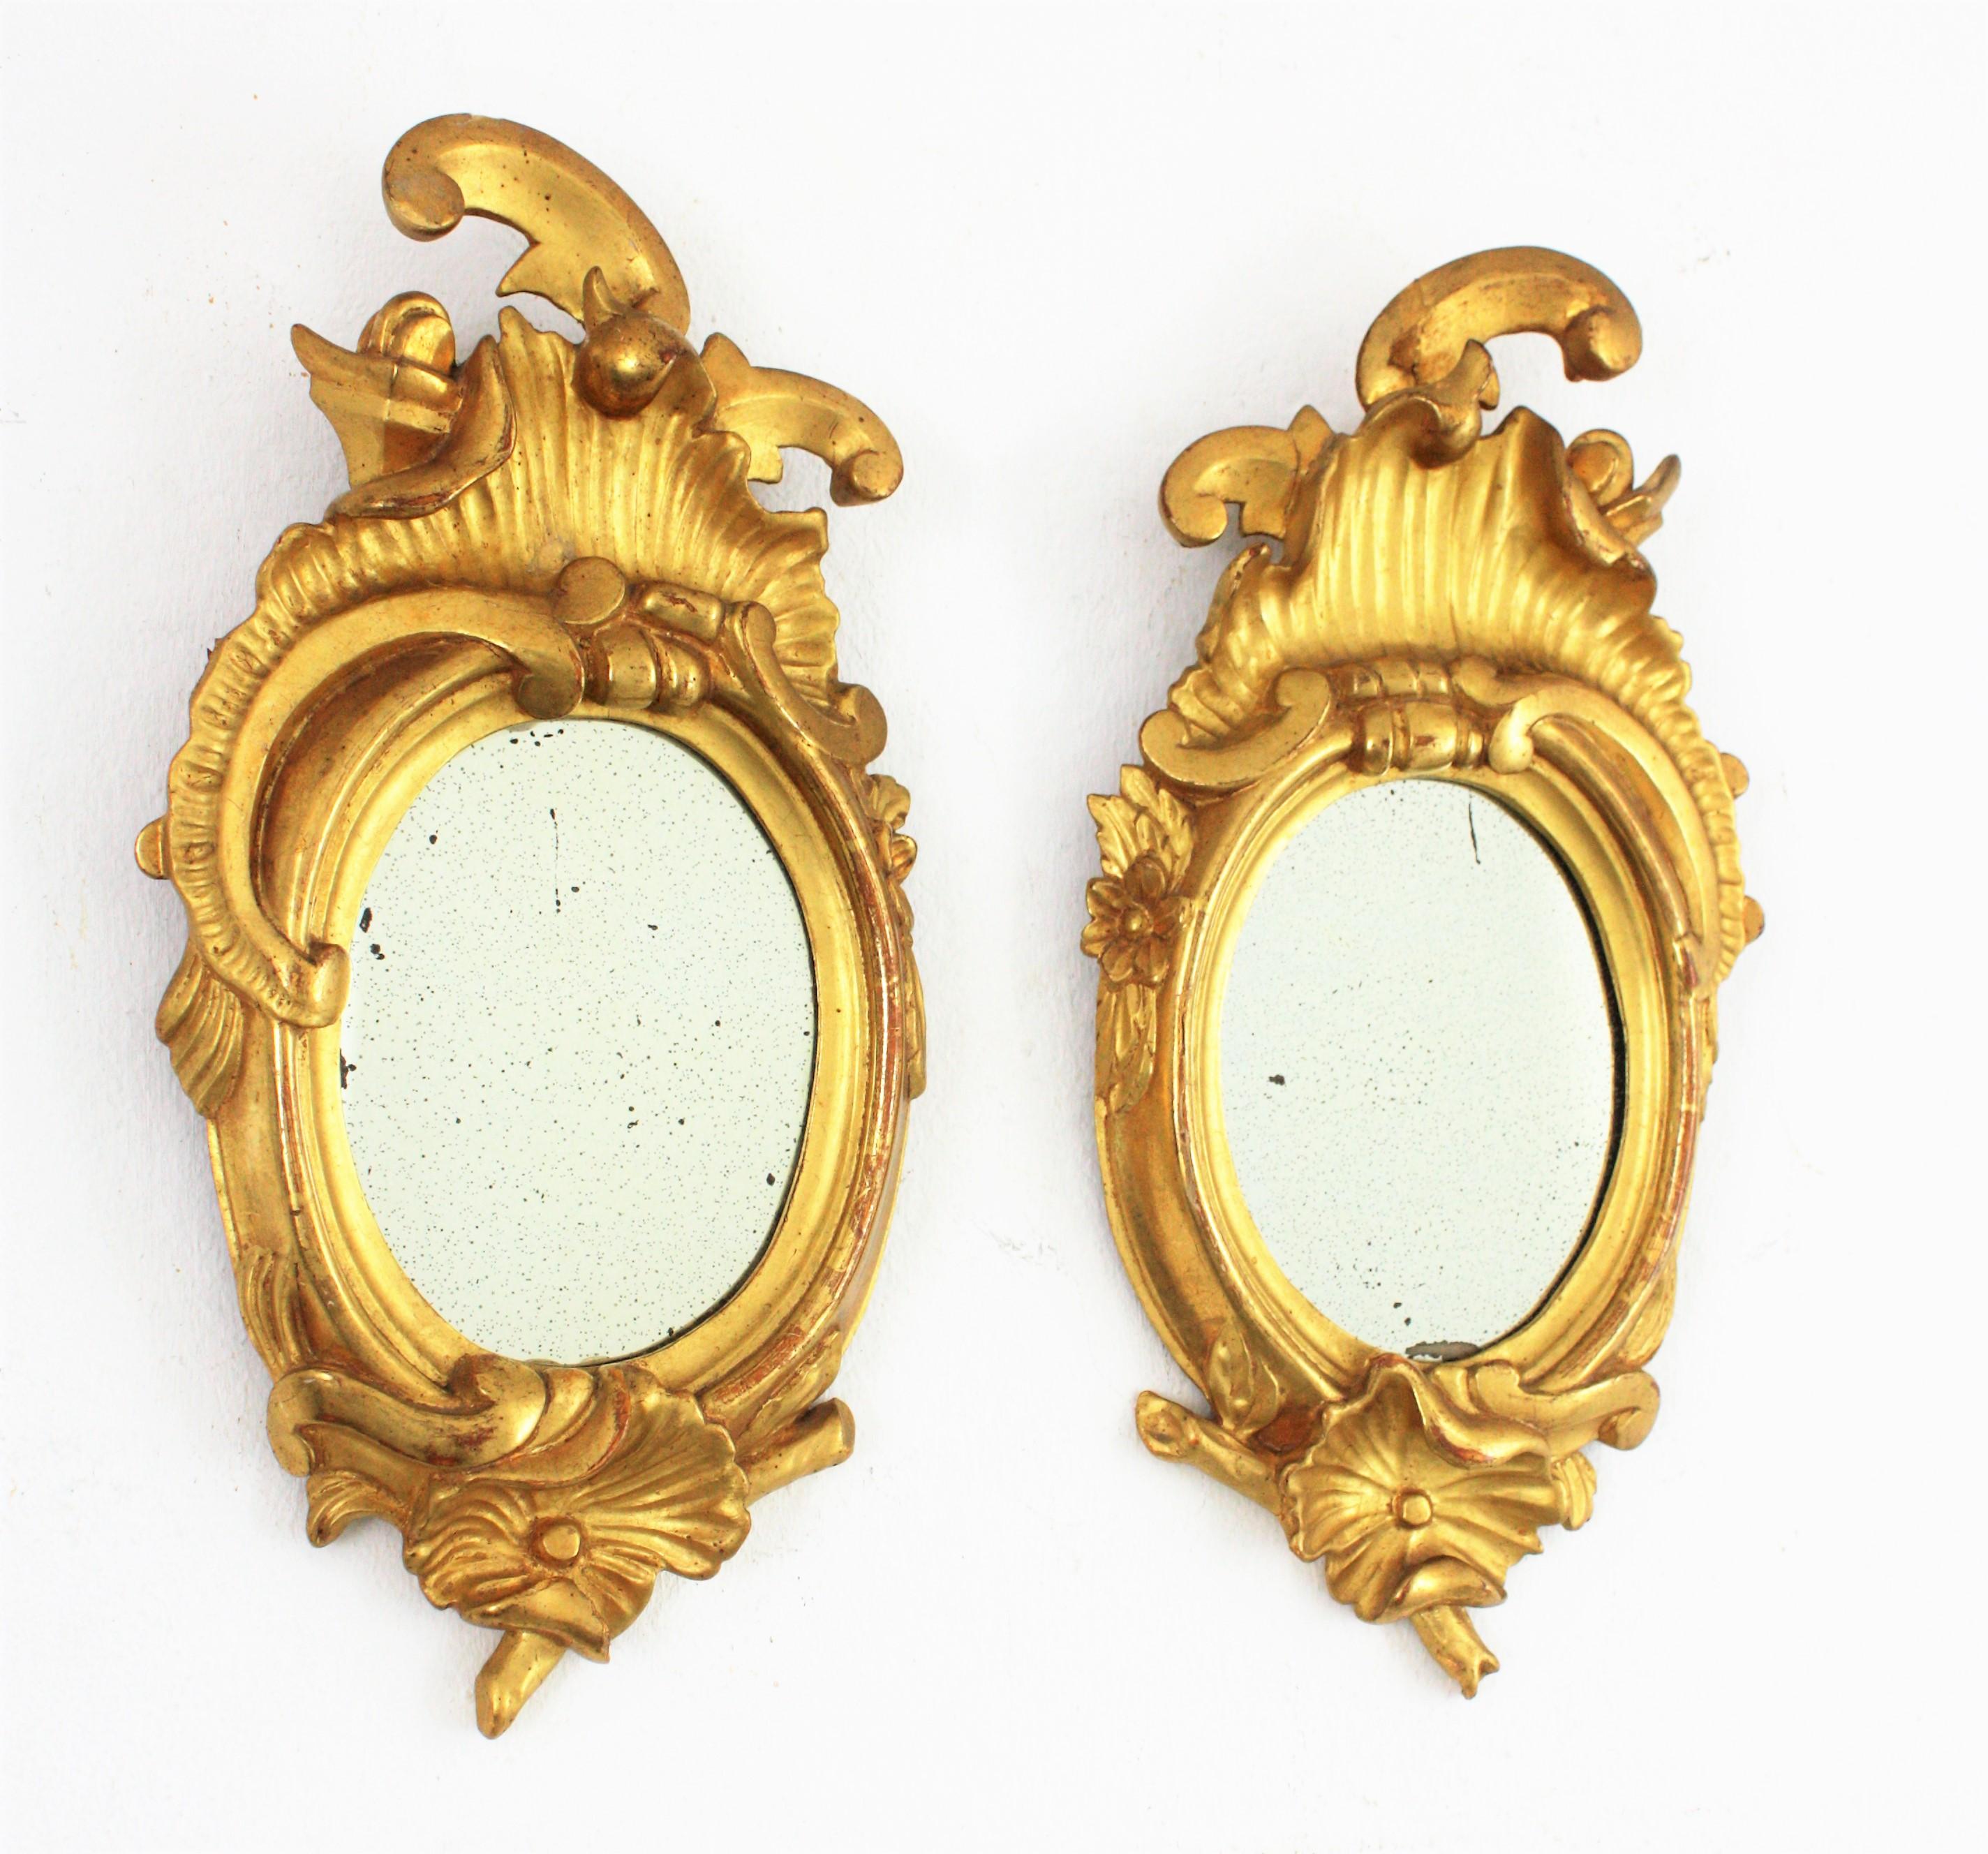 Pair of Art Nouveau Miniature Mirrors in Gold Leaf Giltwood In Good Condition For Sale In Barcelona, ES